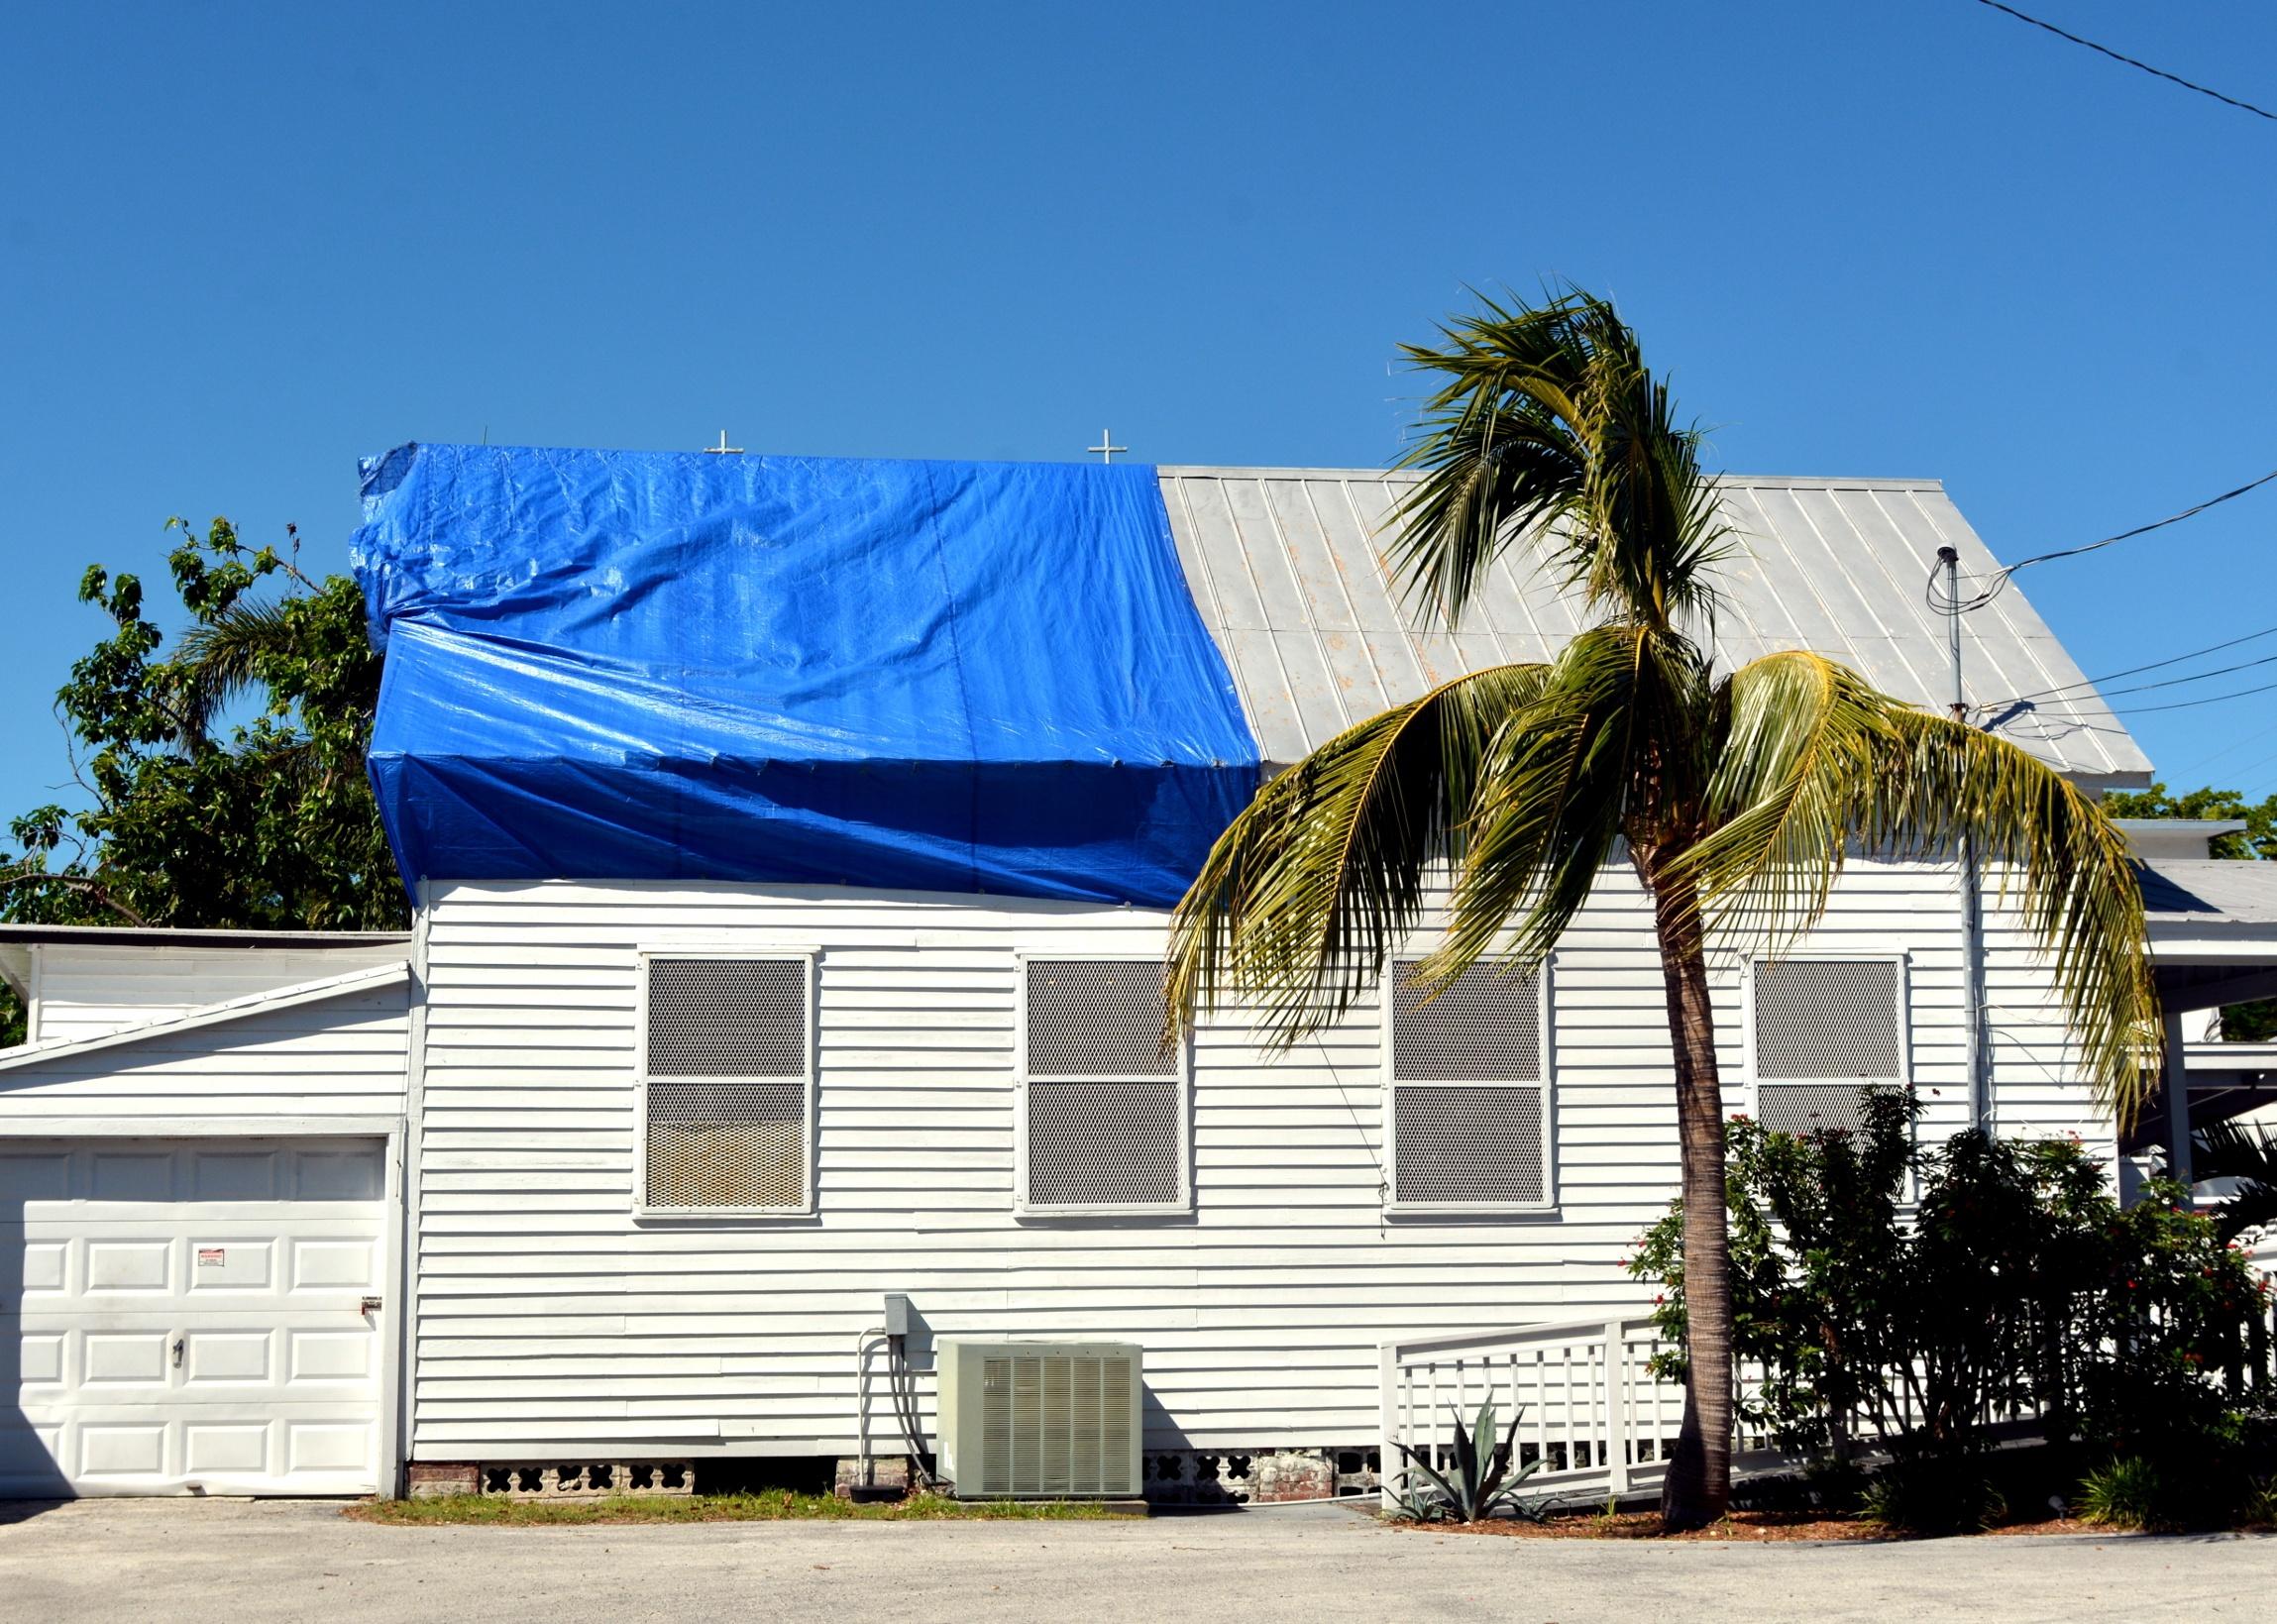 Blue plastic tarpaulin covers roof damage caused by a hurricane.